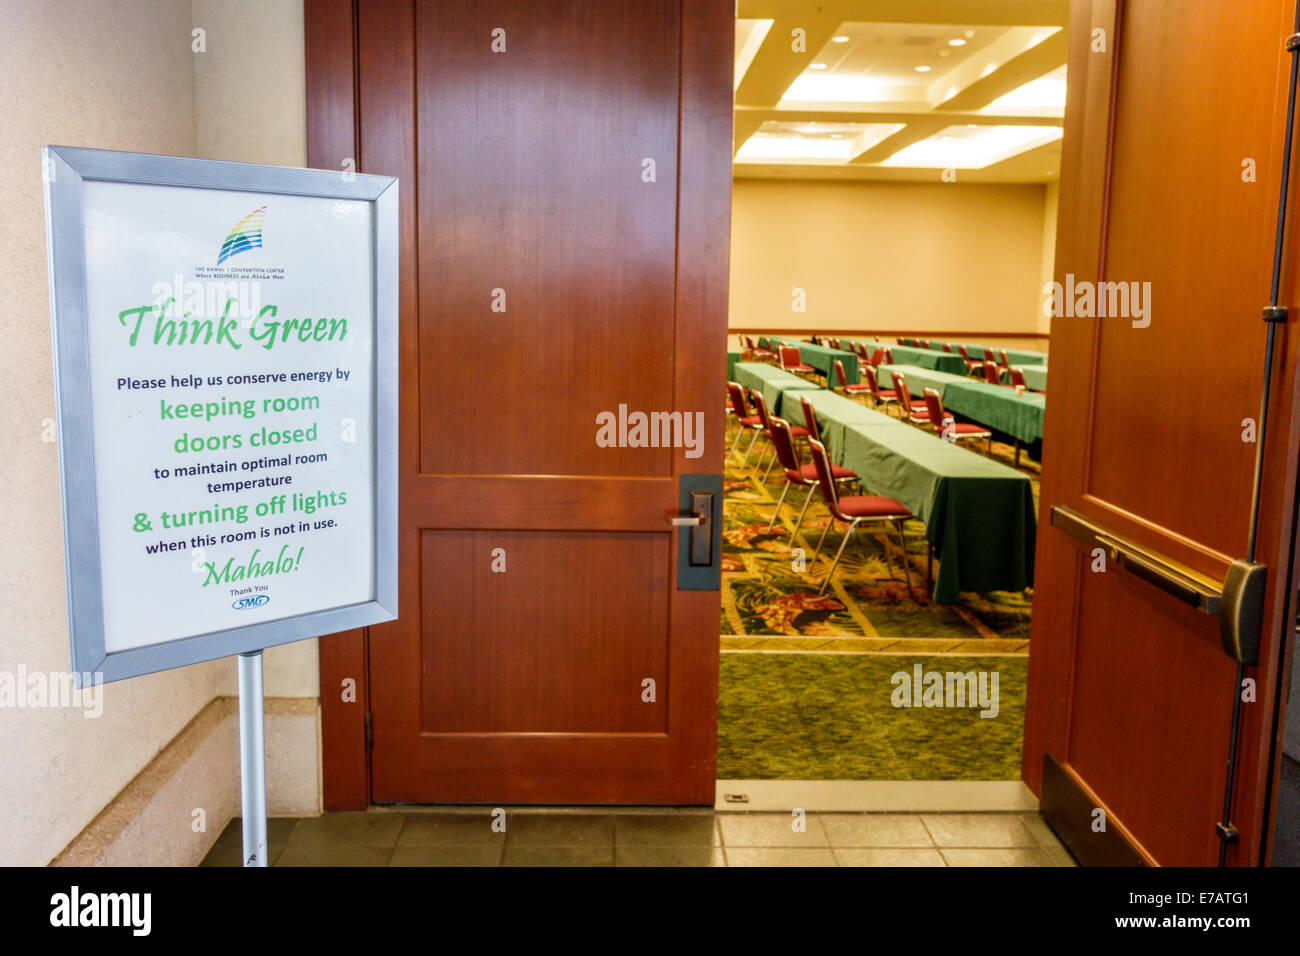 Hawaii,Hawaiian,Oahu,Honolulu,Convention Center,centre,interior inside,conference room entrance,sign,think green,conserve energy,keep doors closed tur Stock Photo